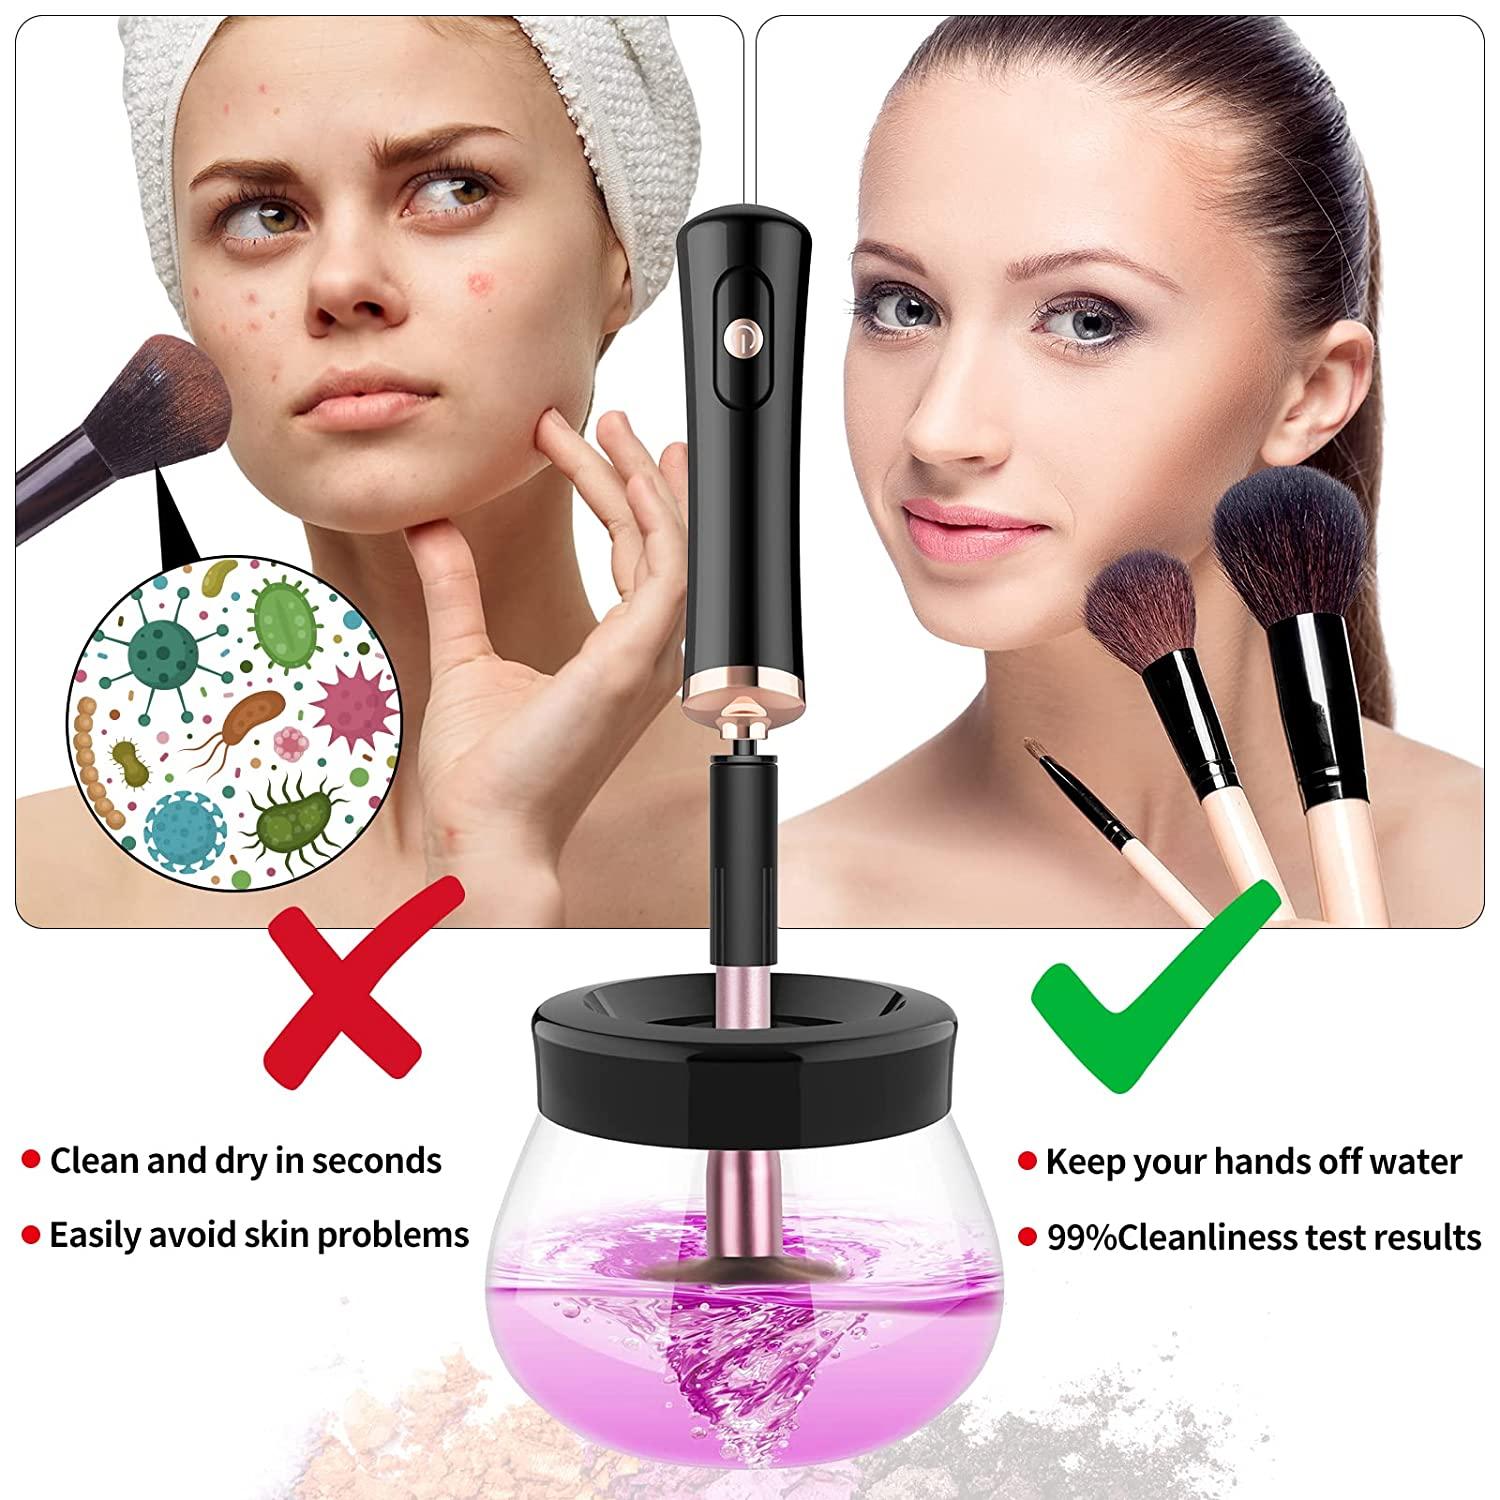 Makeup Brush Cleaner, Electric Make Up Spinning Dryer, with 8 Sizes of  Rubber Collars, Super-Fast Automatic Spinner Machine, Battery Operated,  Pink - Wecolor